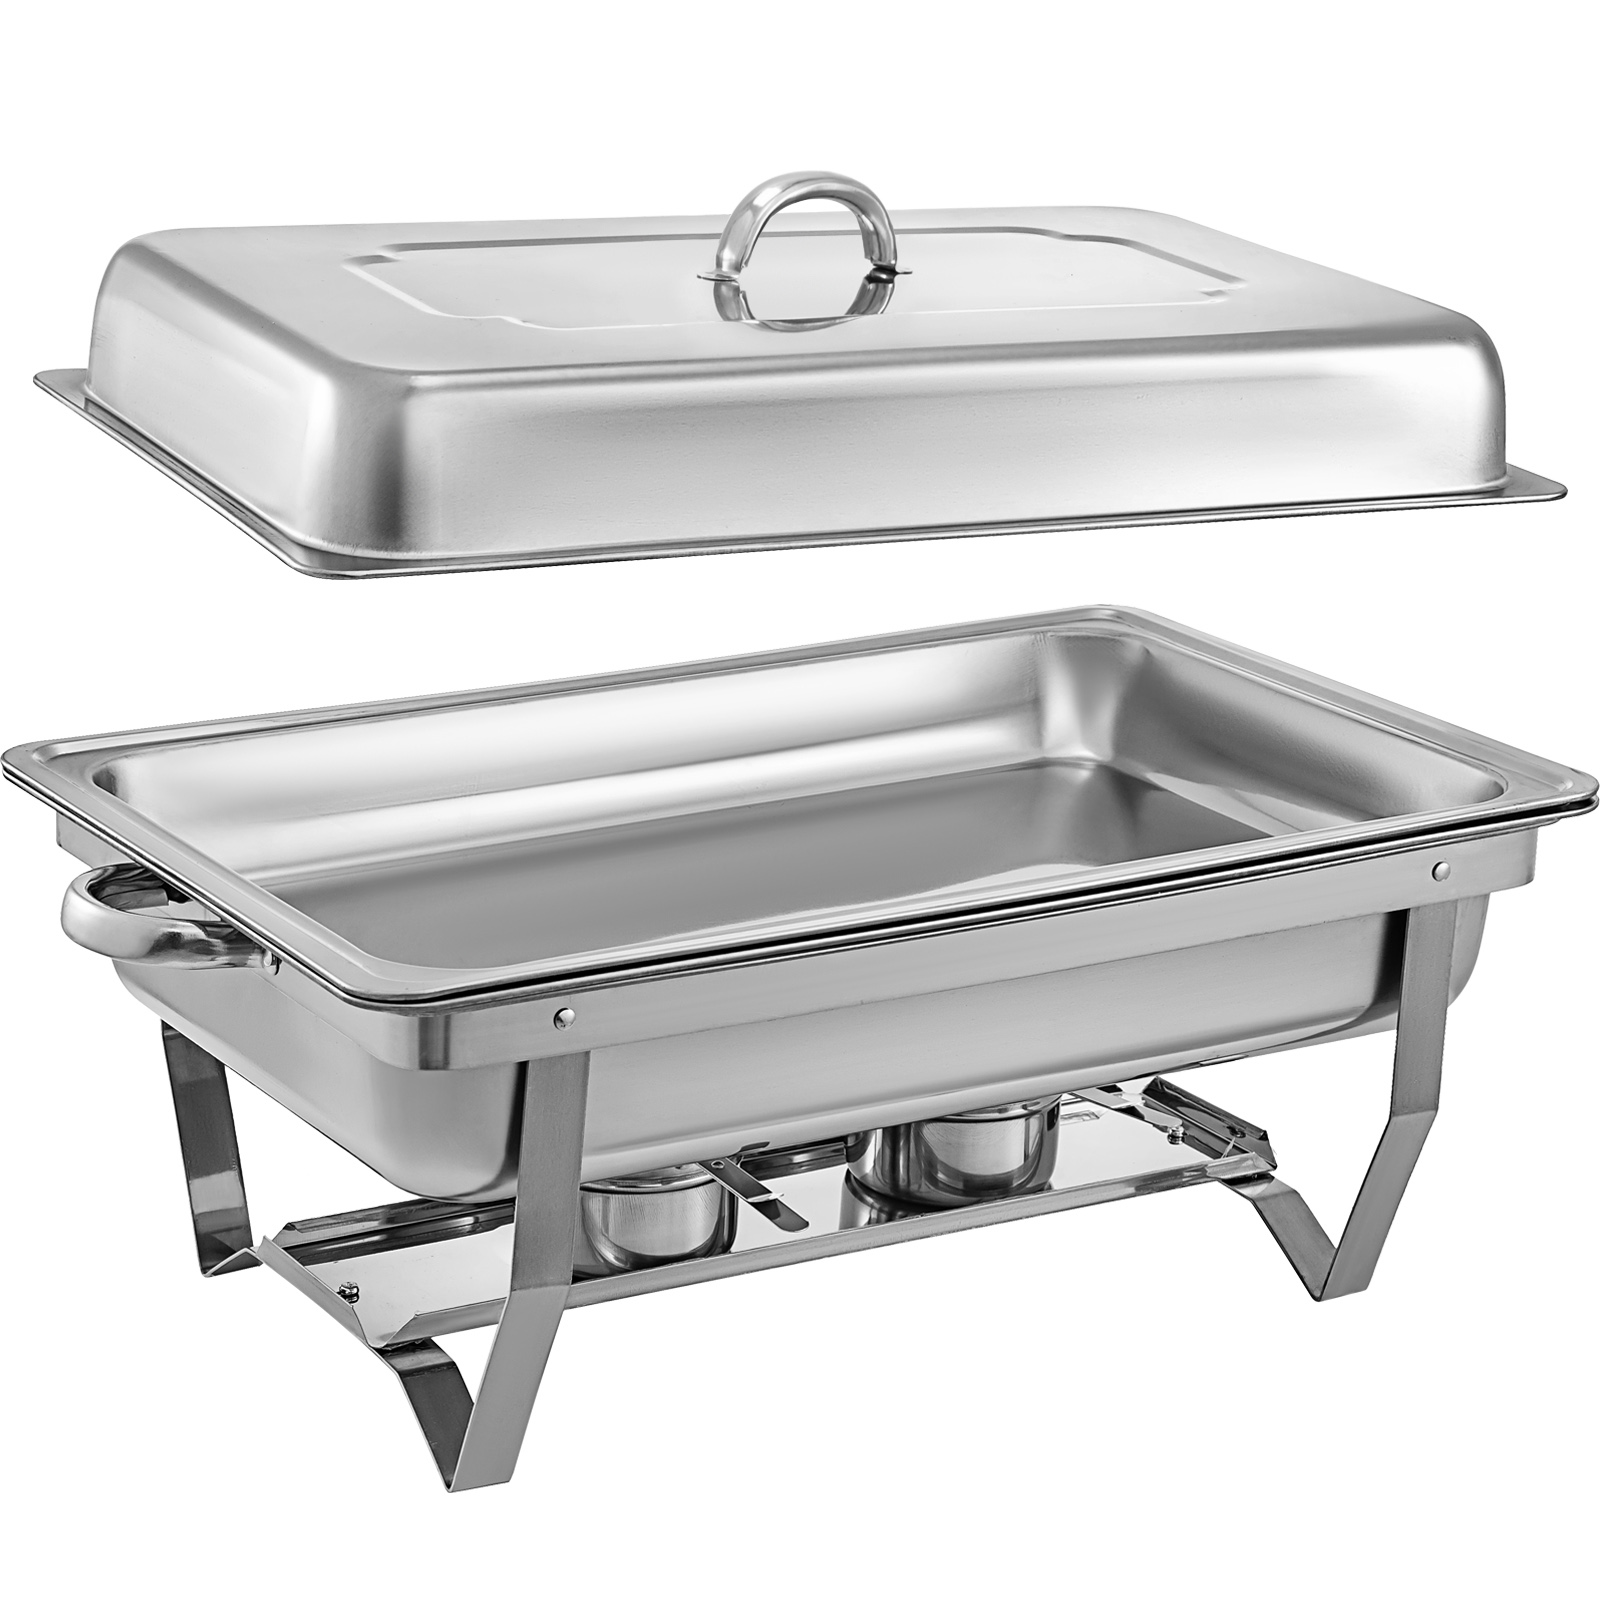 5 PACK  DISH SETS 8 QT CATERING STAINLESS STEEL CHAFER CHAFING FULL SIZE BUFFET 